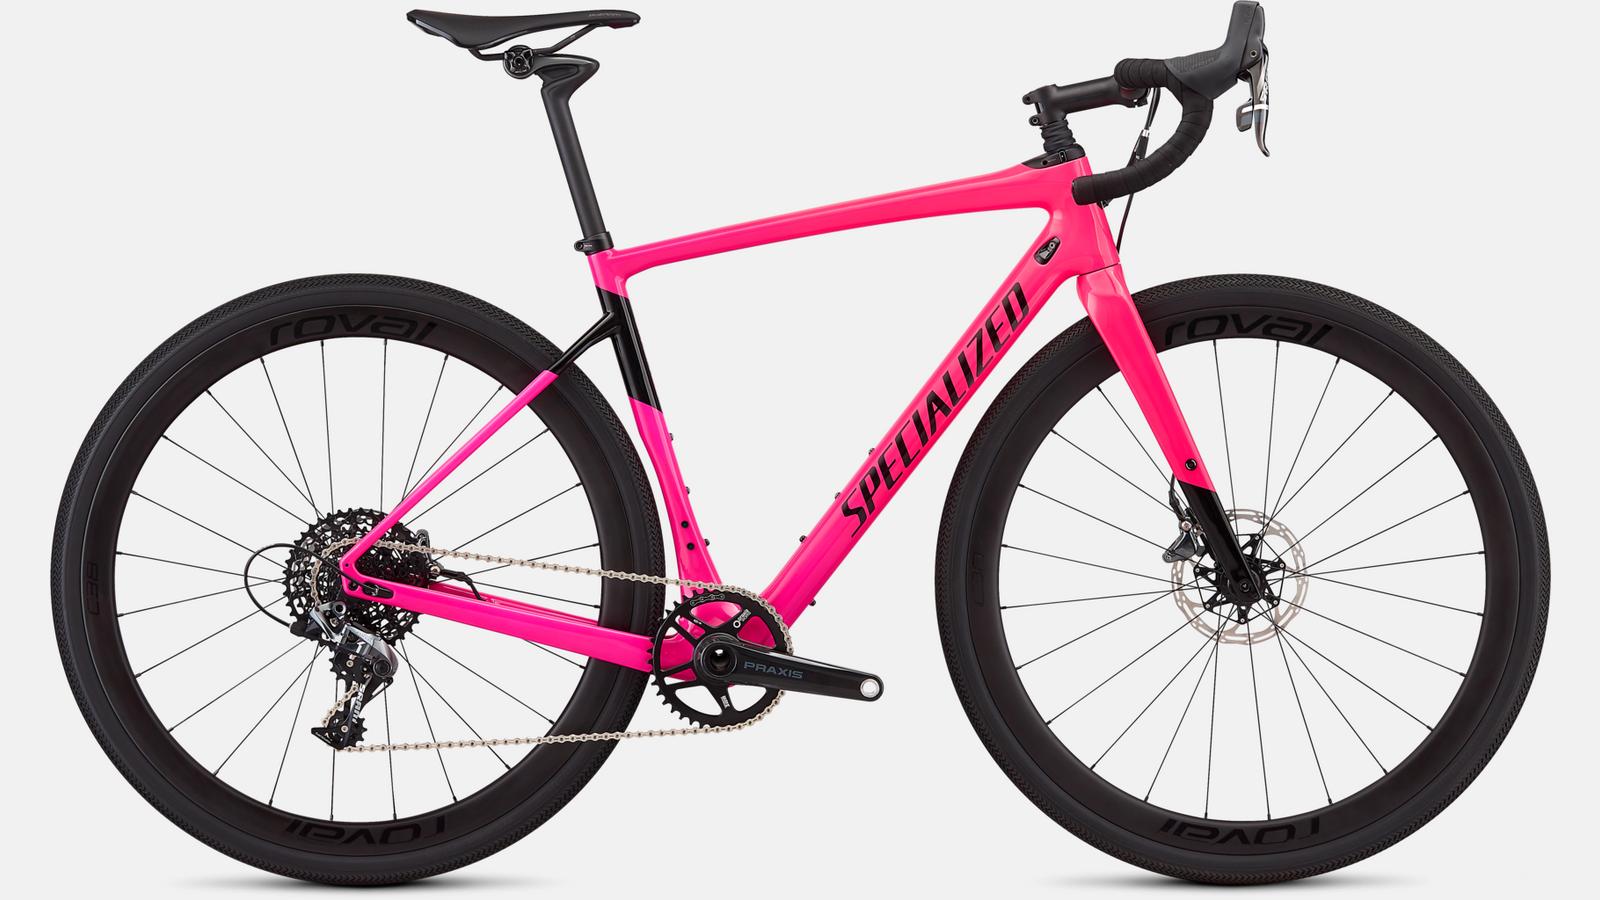 Paint for 2019 Specialized Men's Diverge Expert X1 - Gloss Acid Pink